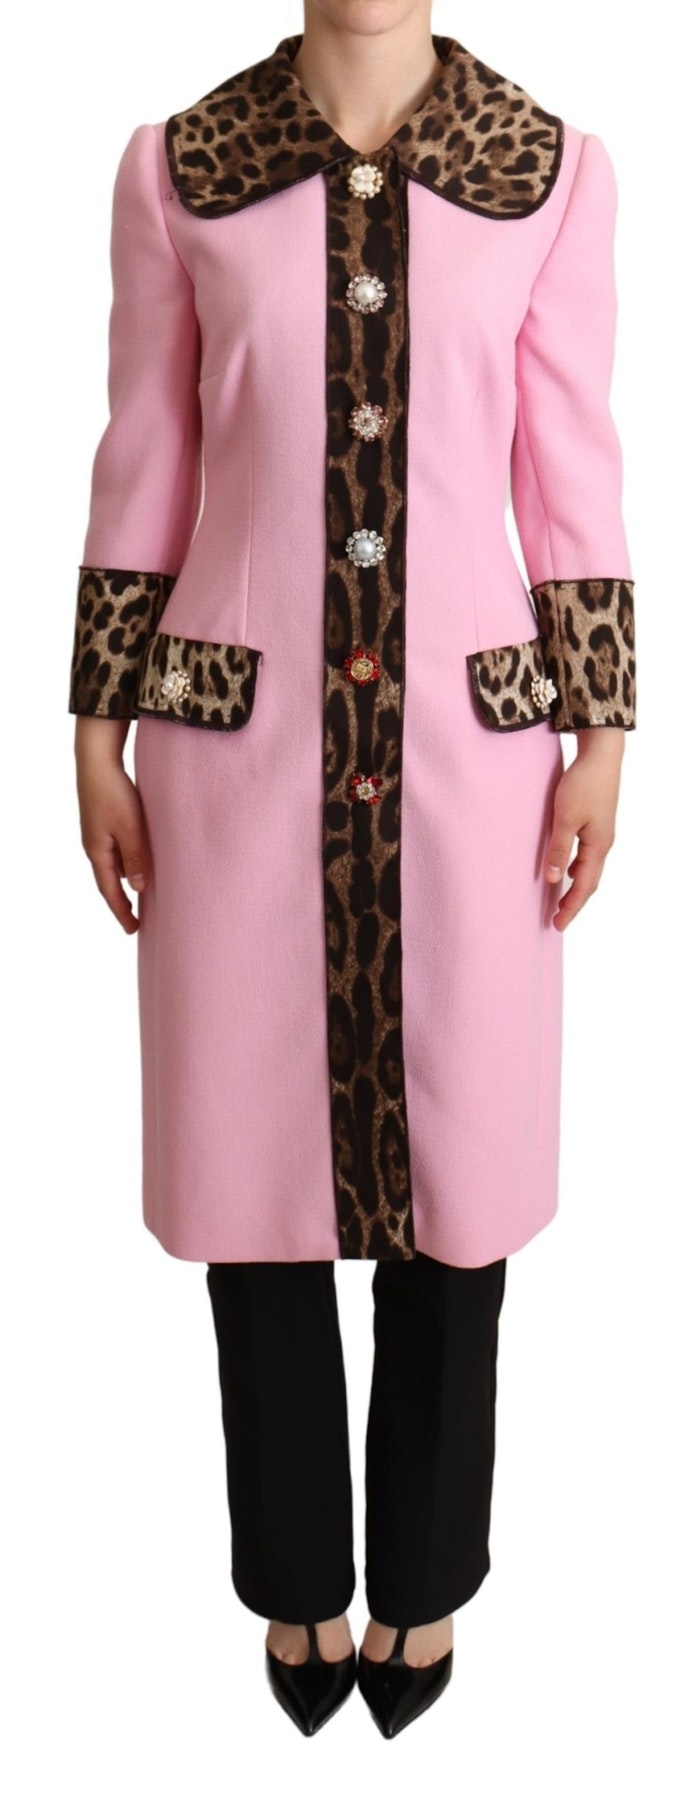 Dolce Gabbana Pink Leopard Wool Trenchcoat Jacket - Onceit